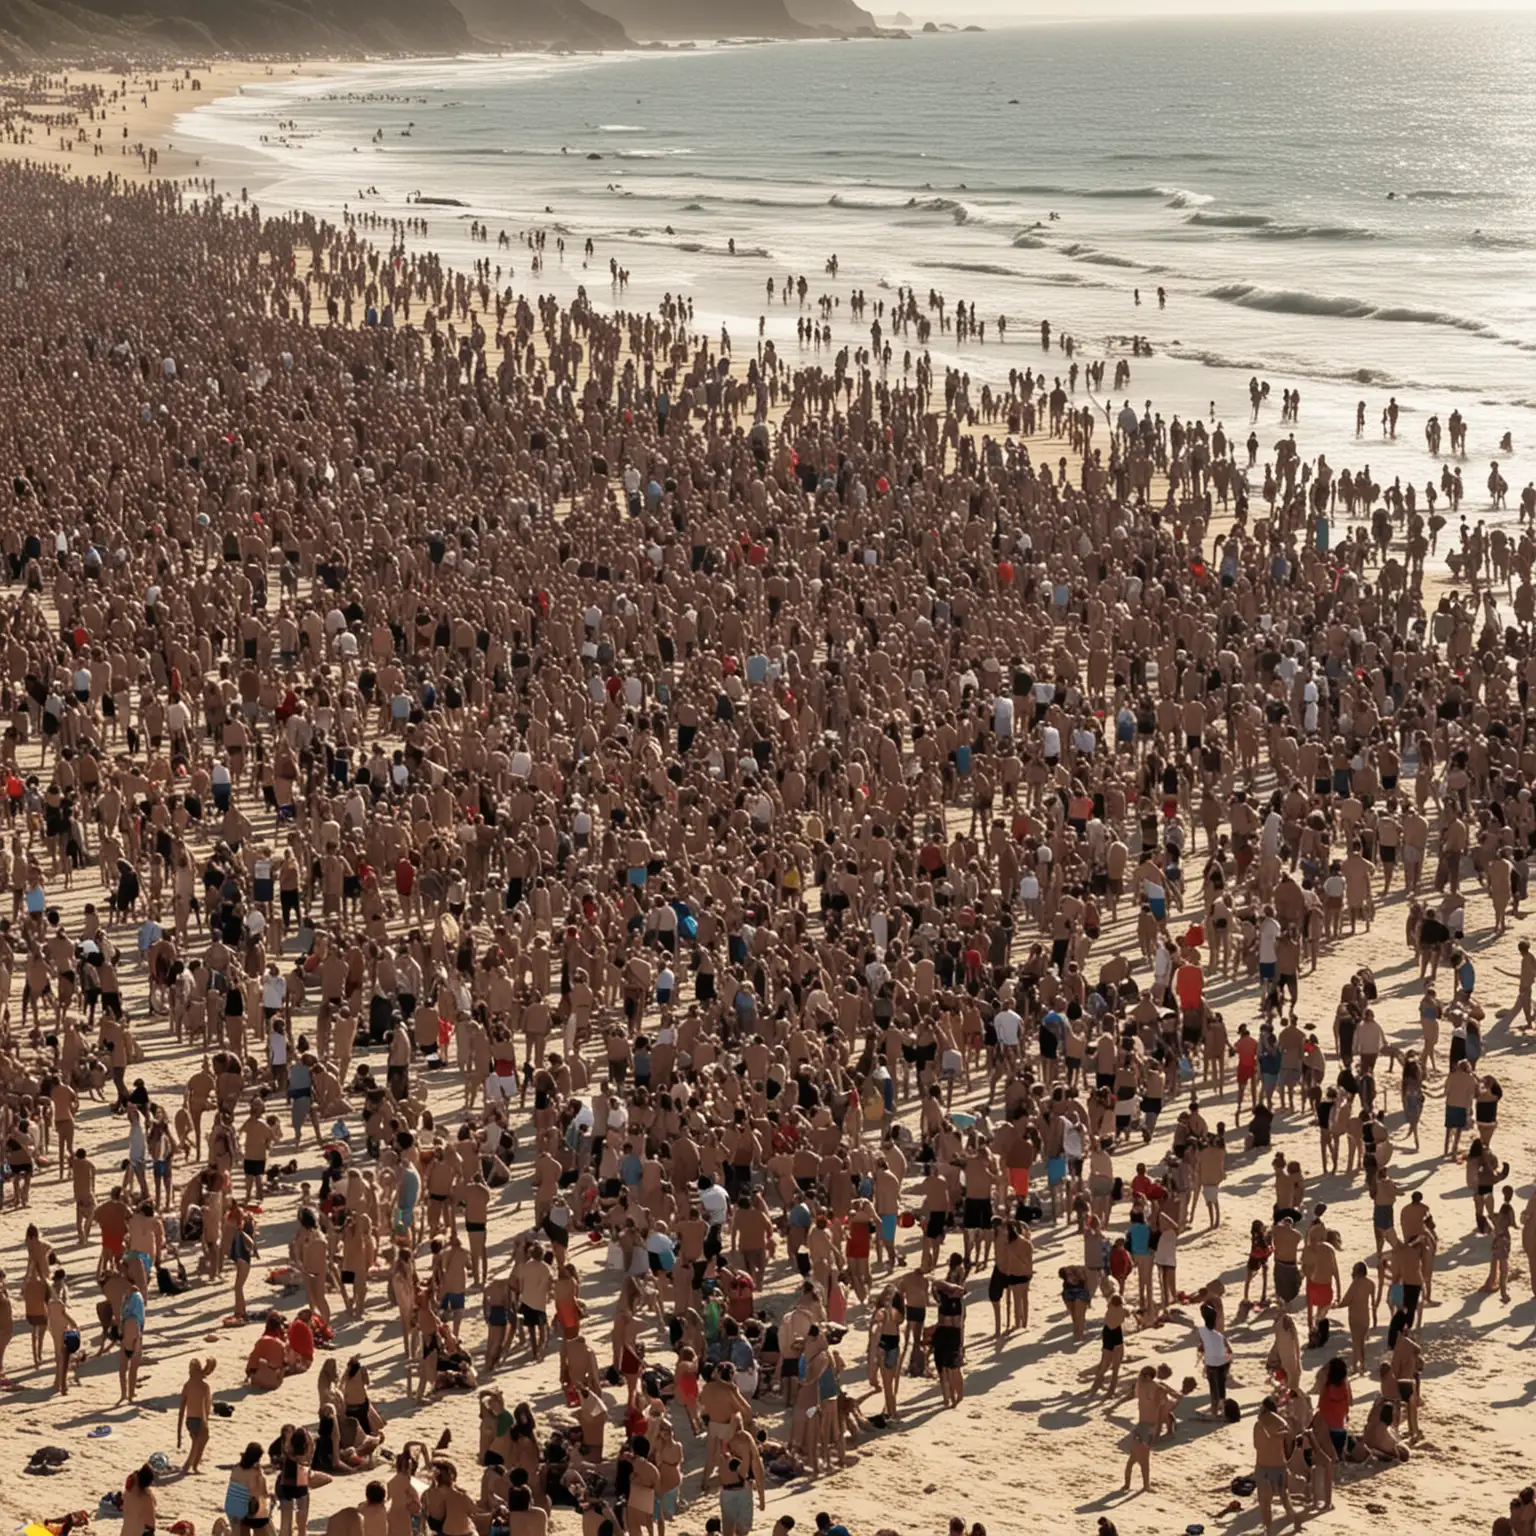 Loads of people partying on the beach